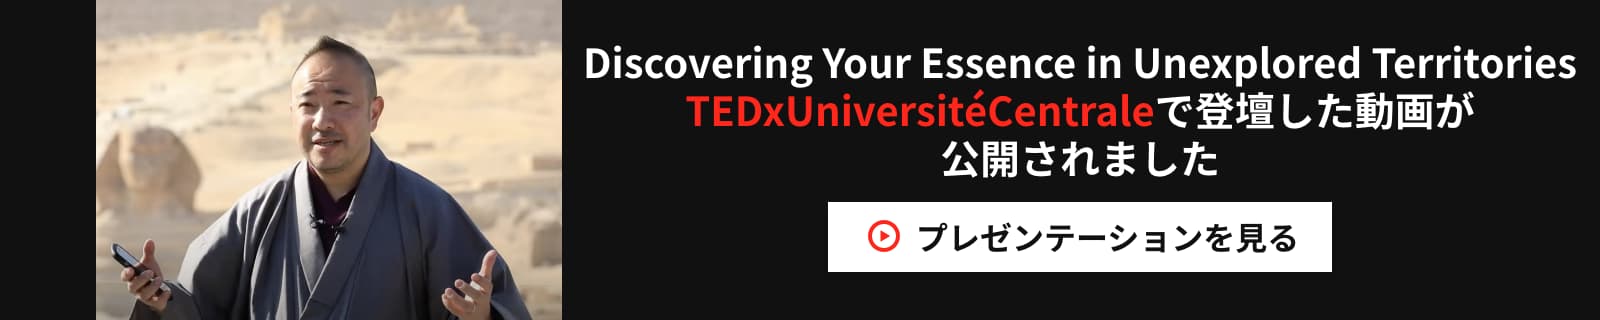 Discovering Your Essence in Unexplored Territories
TEDxUniversitéCentraleで登壇した動画が公開されました プレゼンテーションを見る